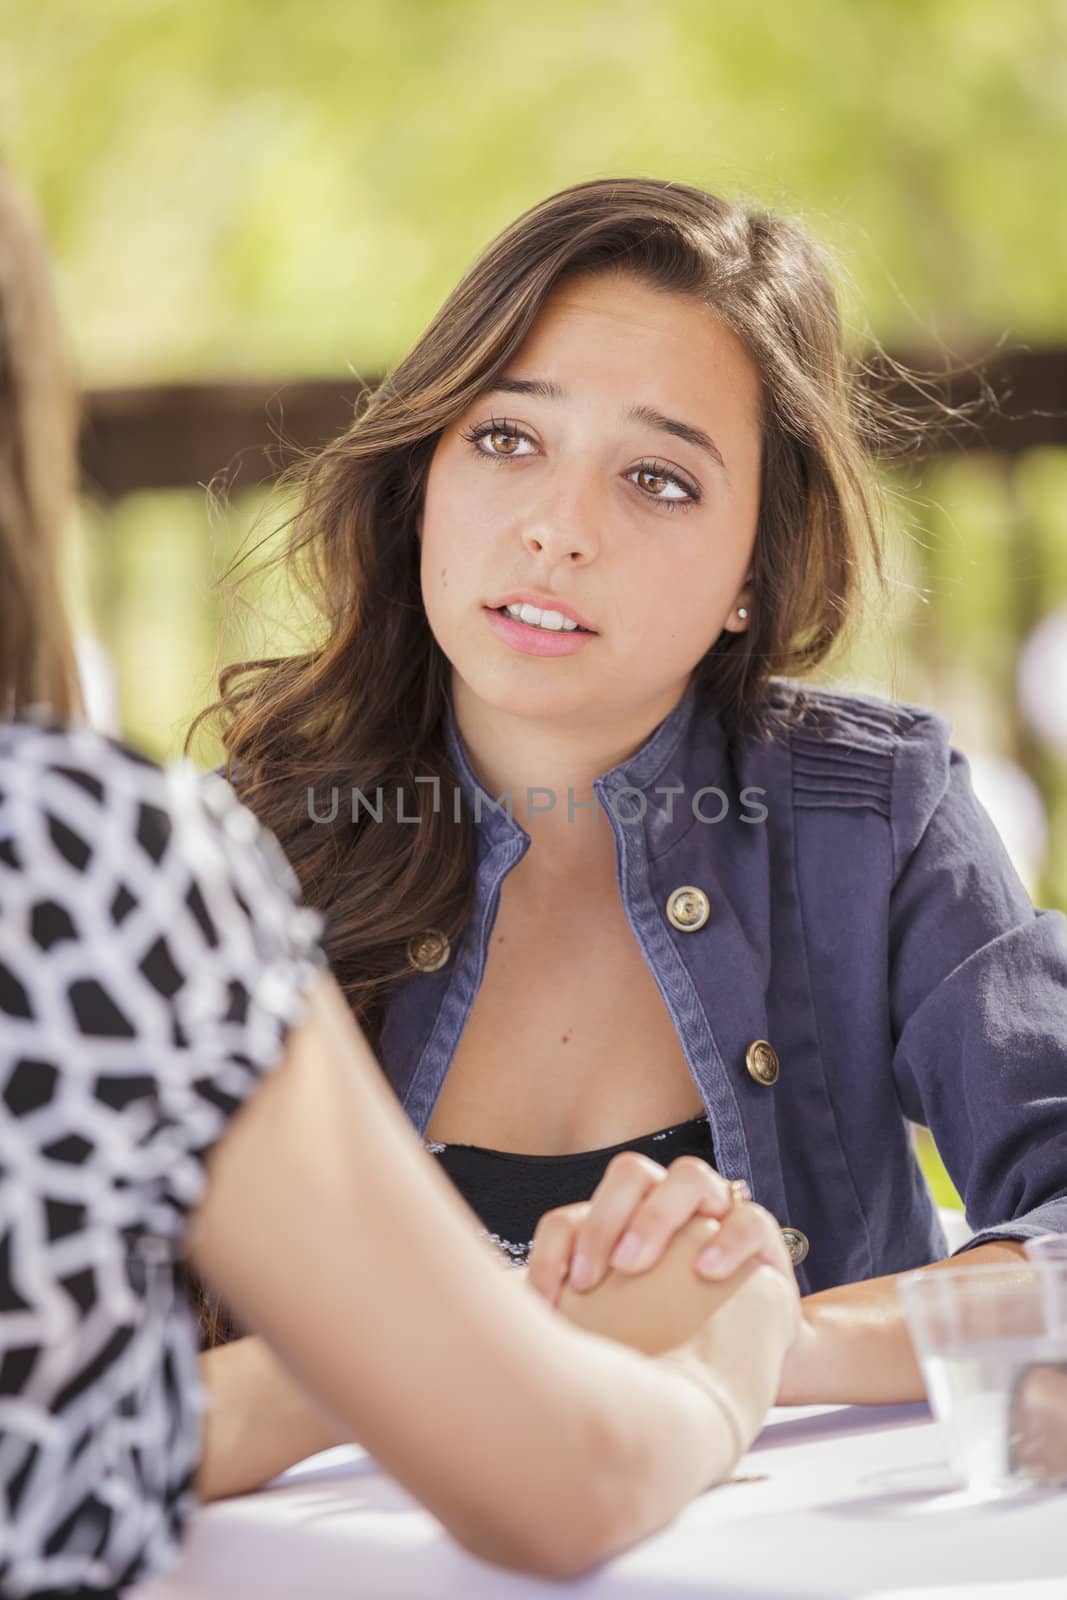 Attractive Girl Comforting A Friend Sitting Outdoors.